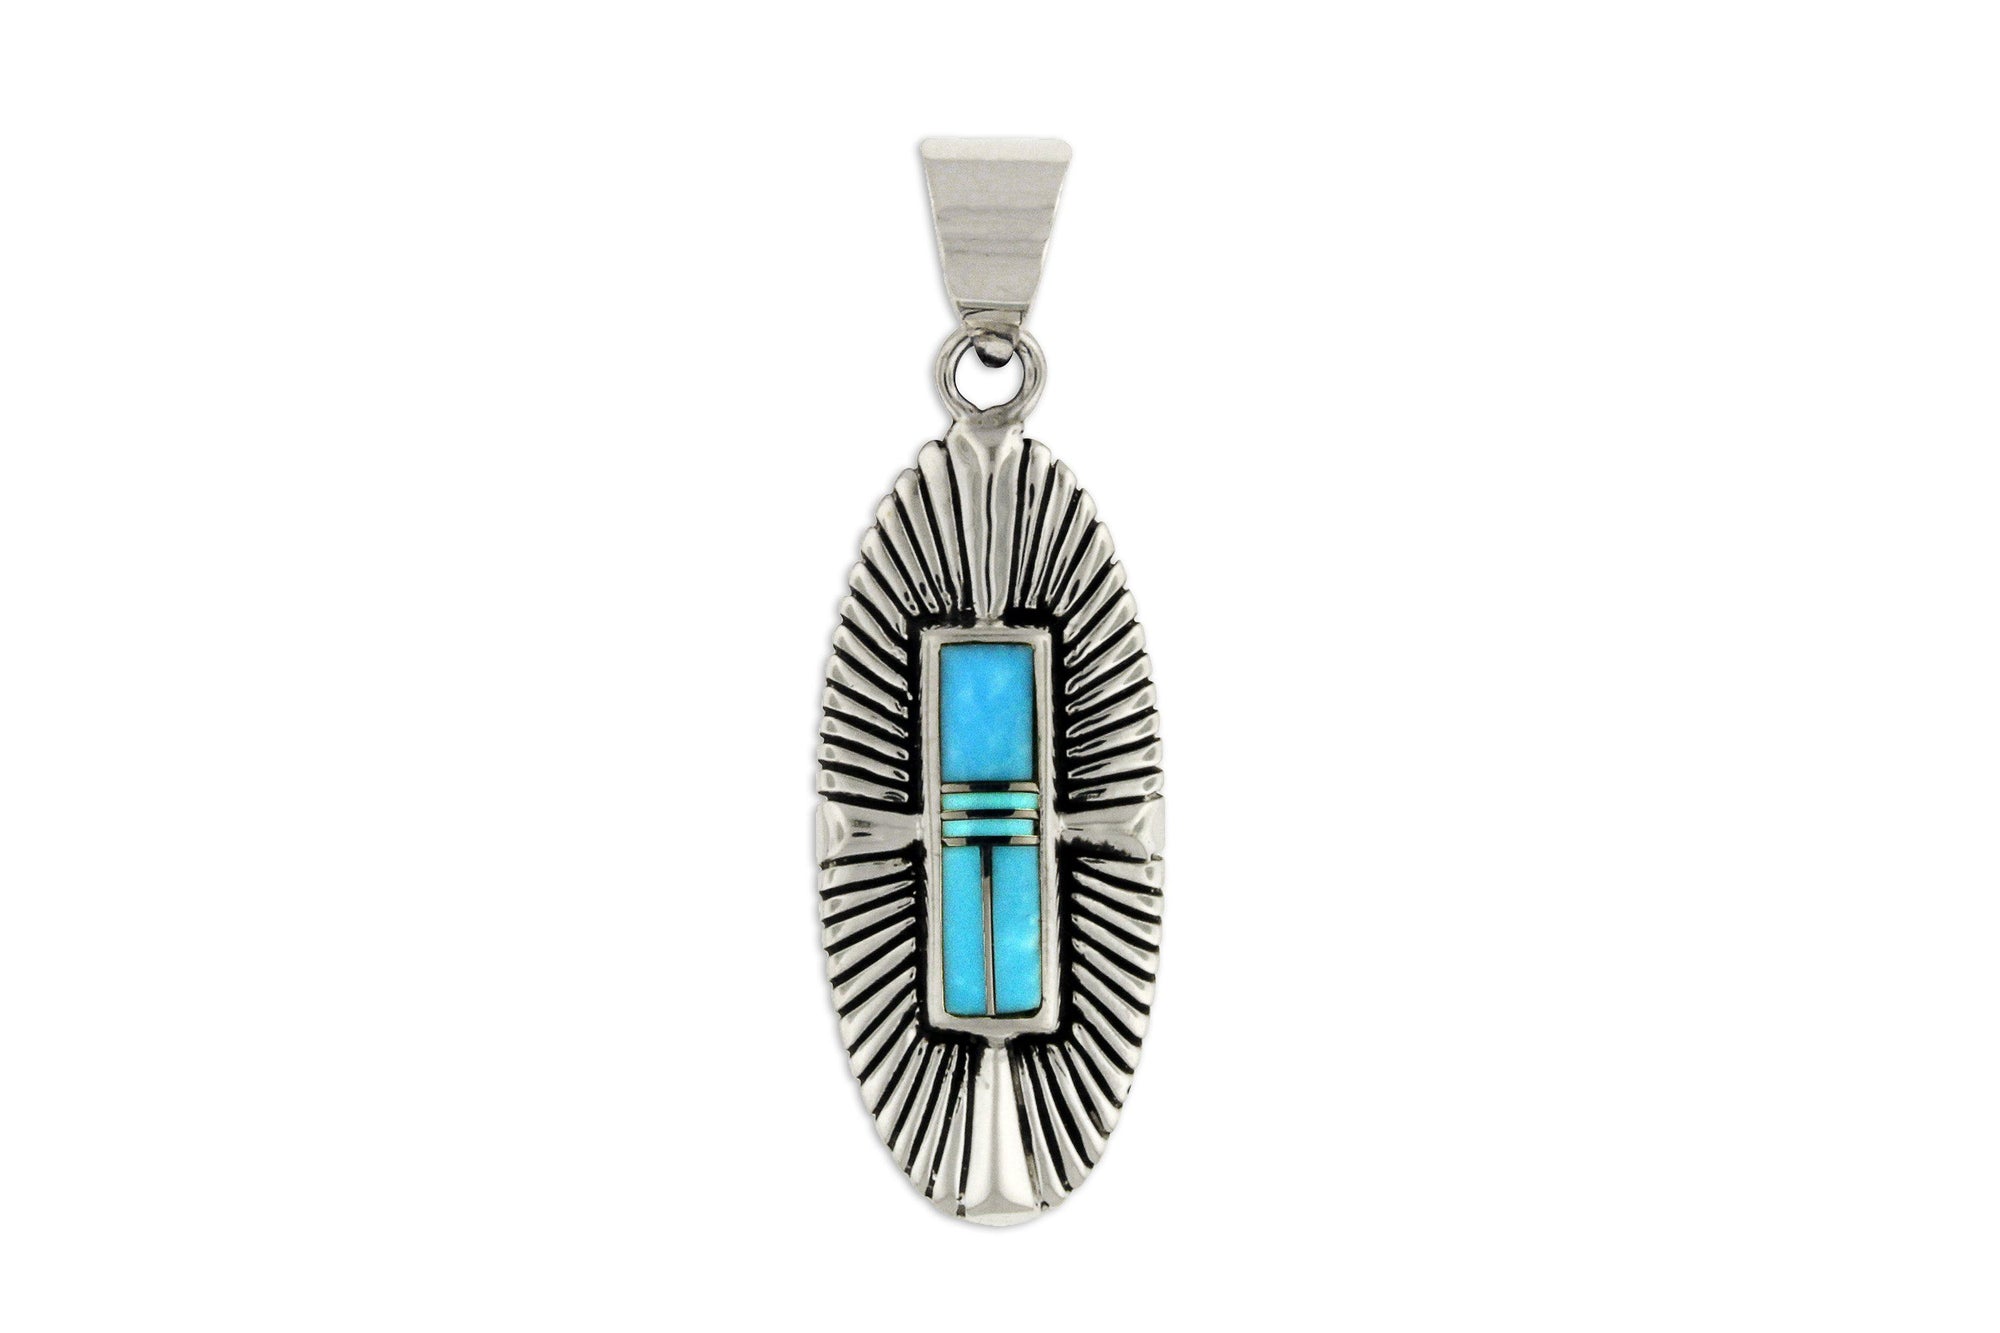 Turquoise Pendant by David Rosales